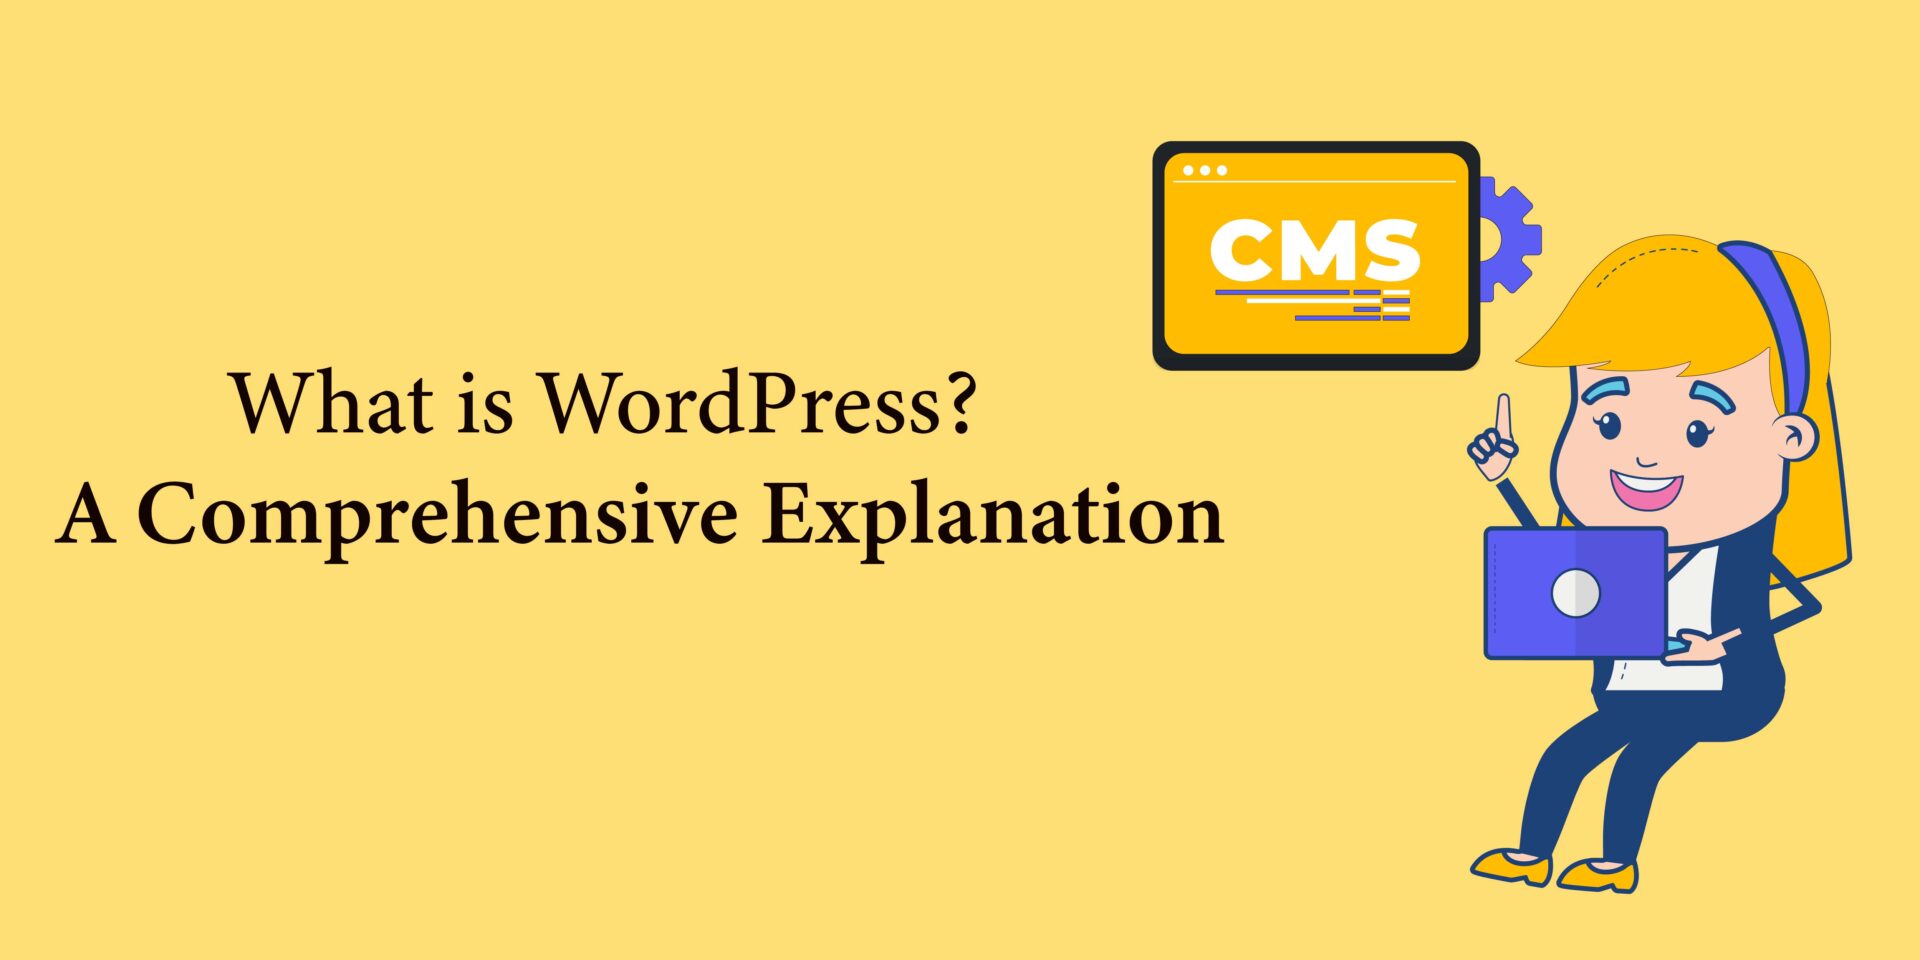 What is WordPress? A Comprehensive Explanation